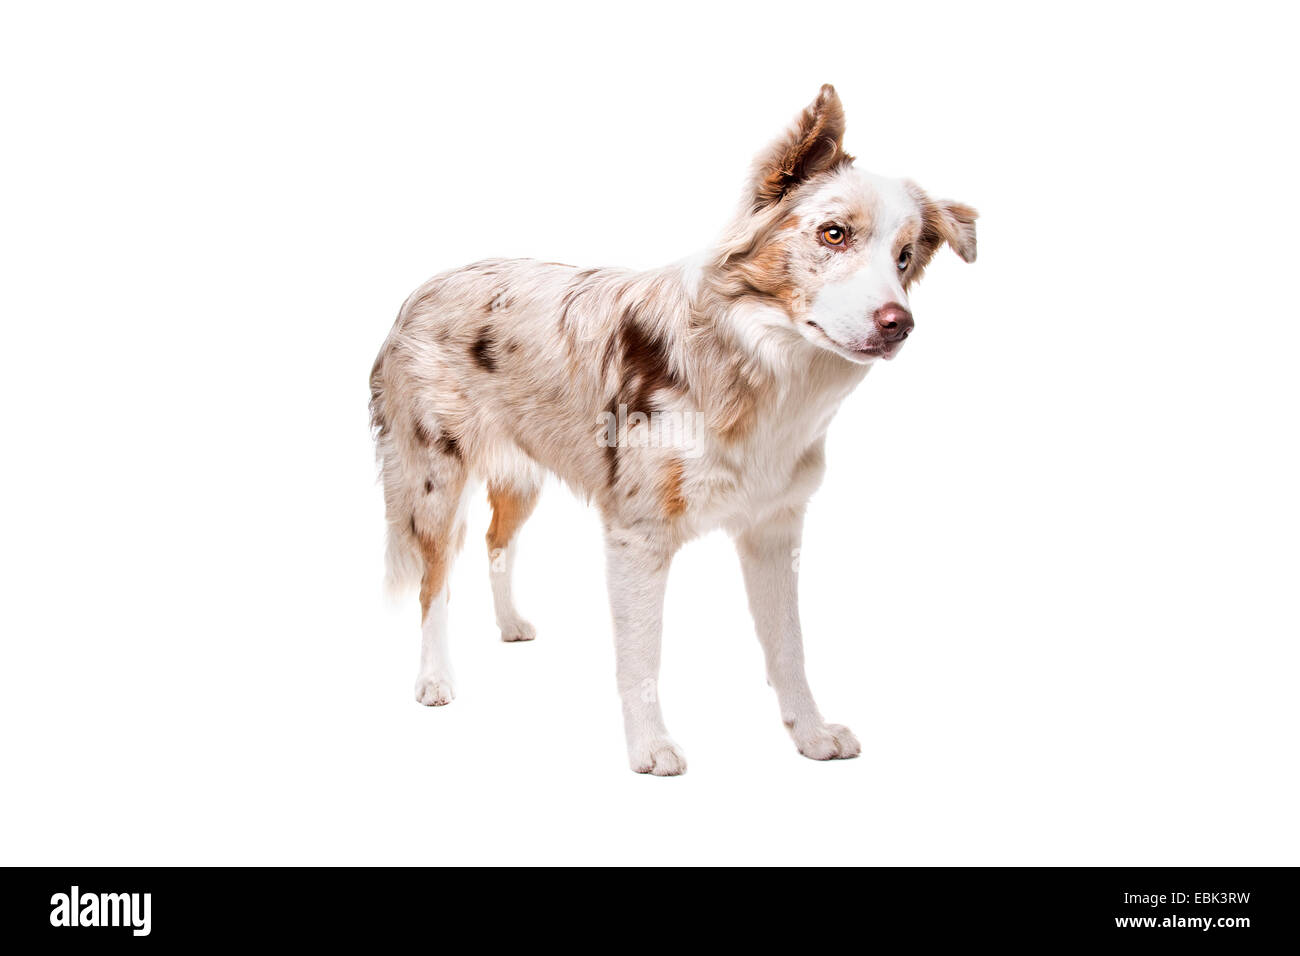 border collie dog in front of a white background Stock Photo